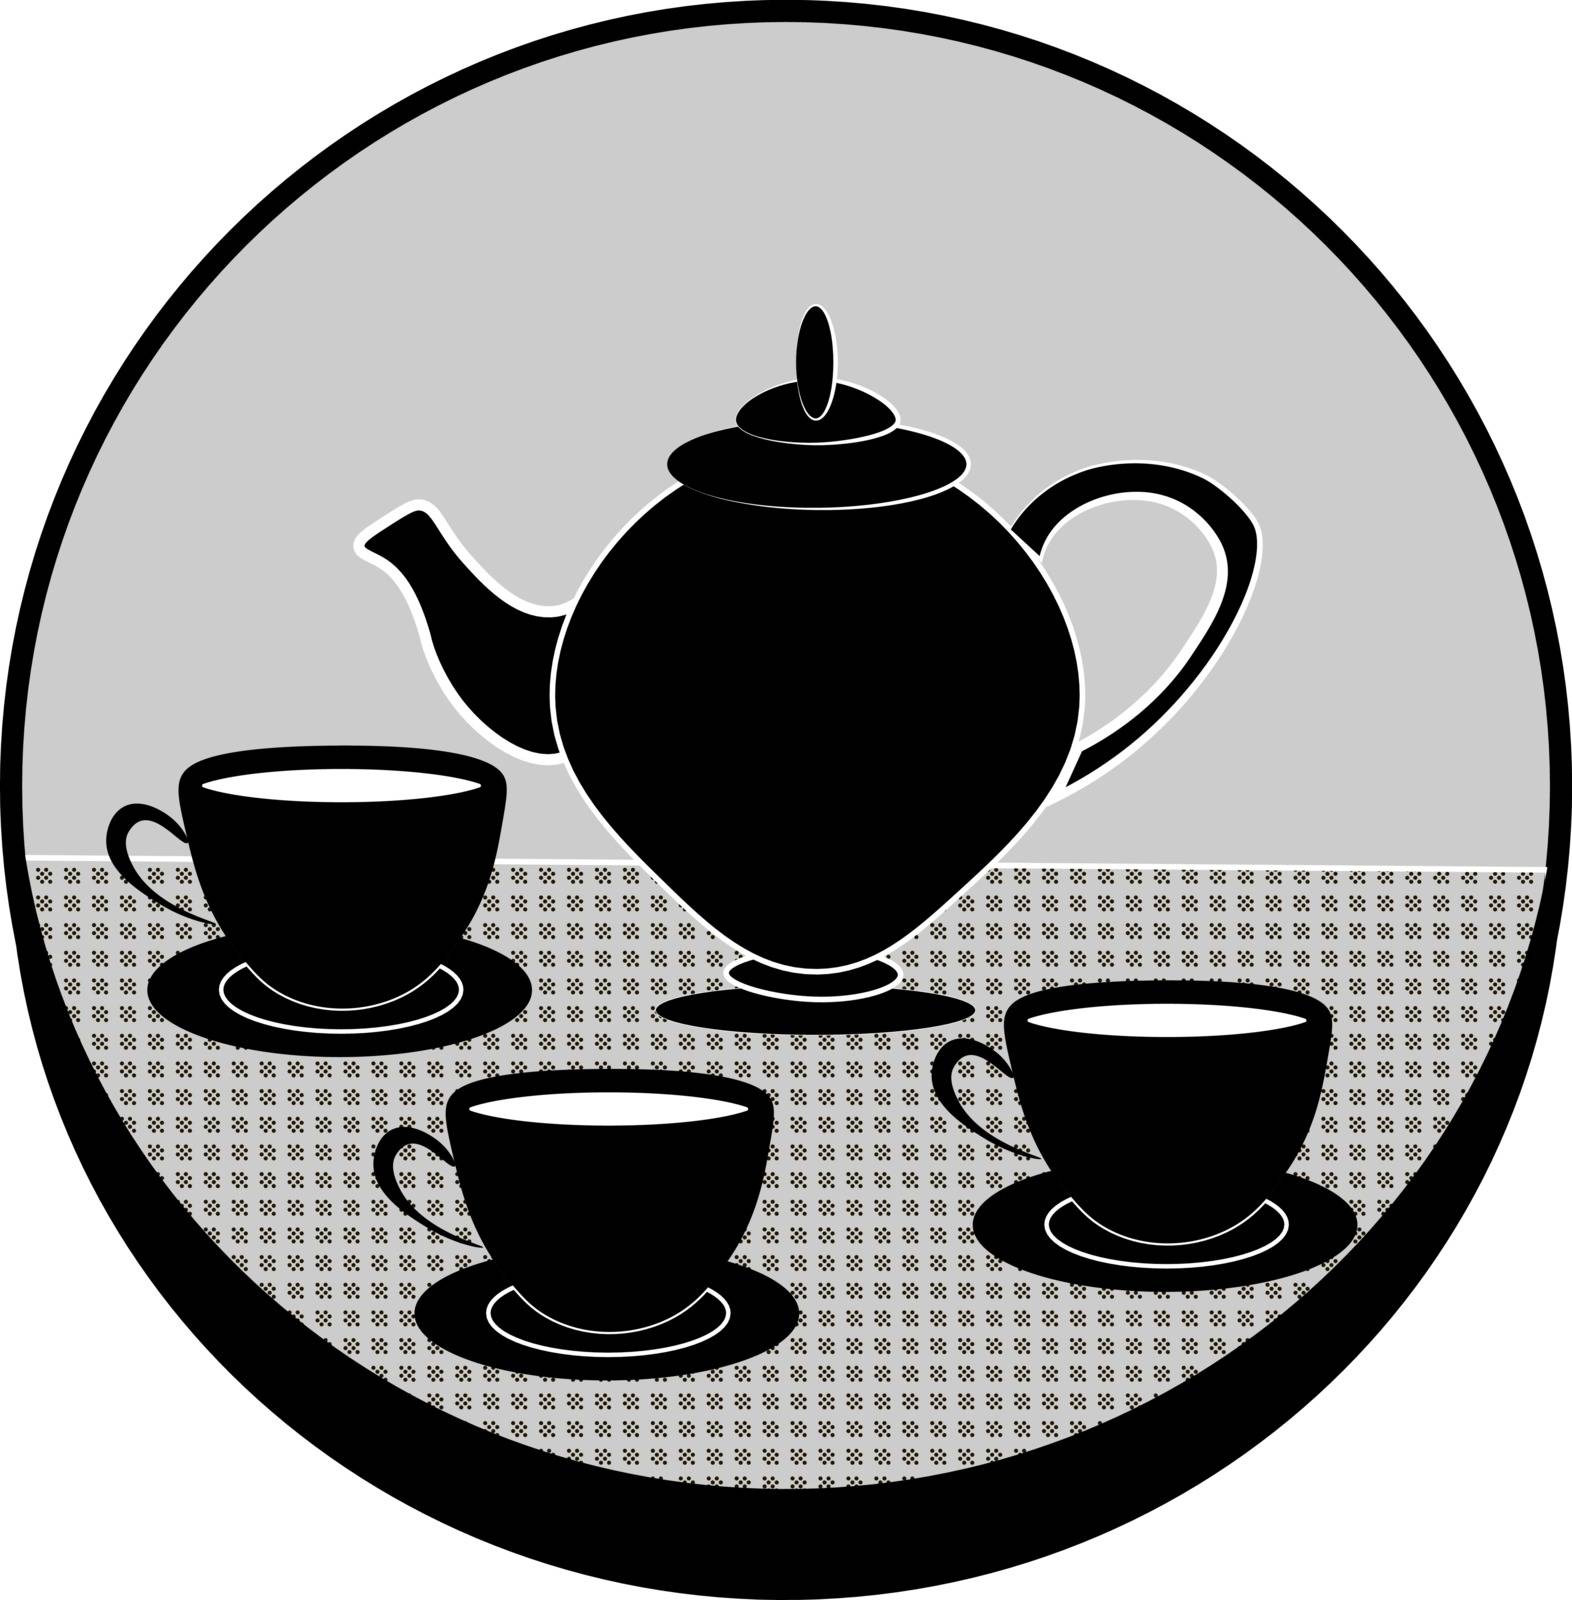 Grey circle with the black vintage teapot and three black cups of tea on the table